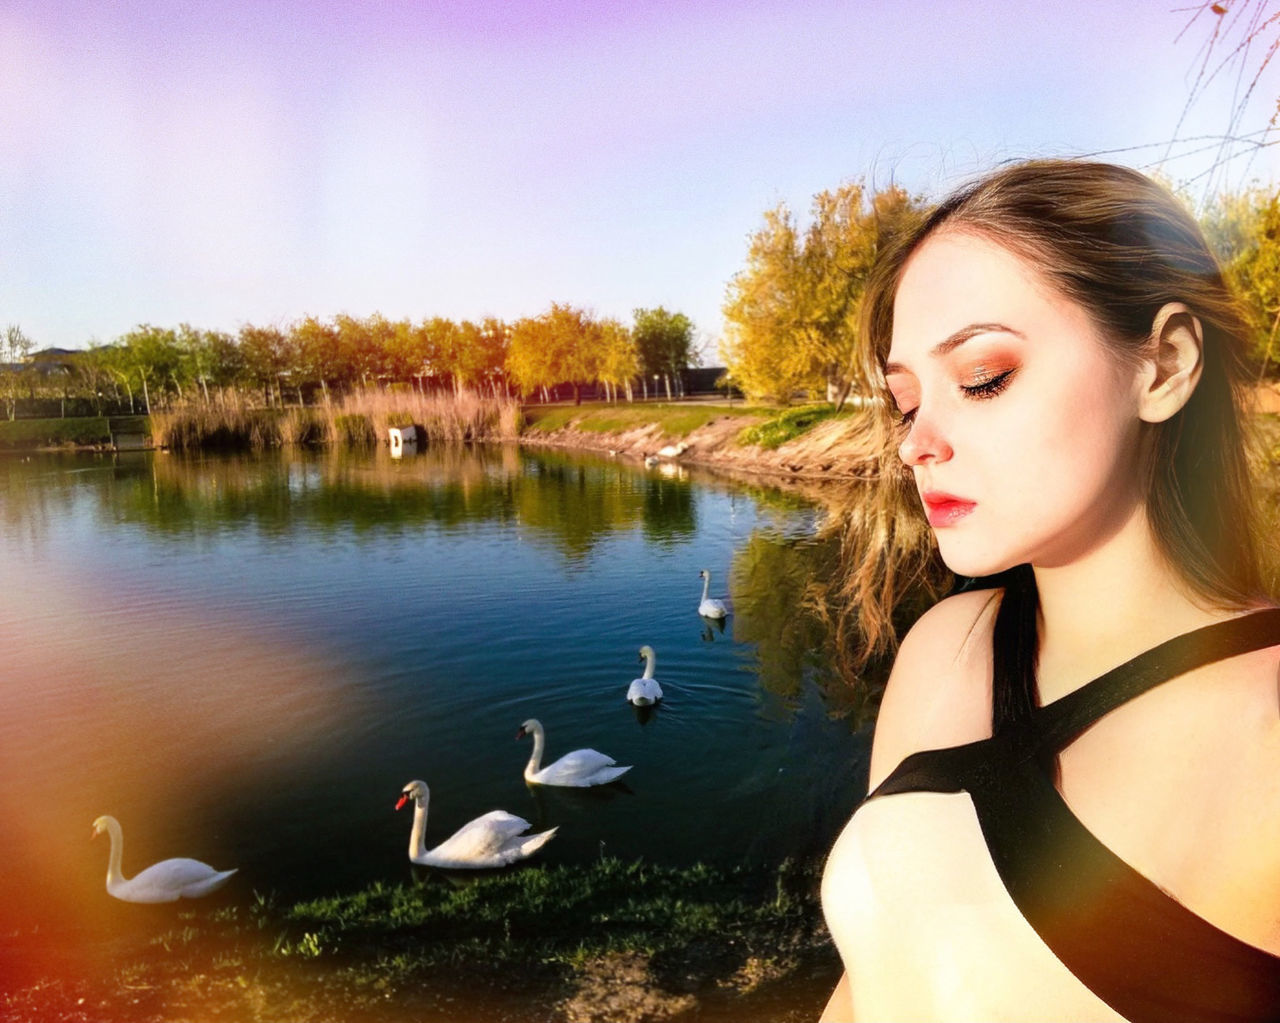 water, bird, animal, women, animal themes, young adult, one person, adult, animal wildlife, nature, lake, wildlife, hairstyle, duck, long hair, leisure activity, beauty in nature, one animal, sky, portrait, lifestyles, outdoors, tree, tranquility, day, fashion, female, plant, reflection, swimming, brown hair, looking, clothing, water bird, side view, person